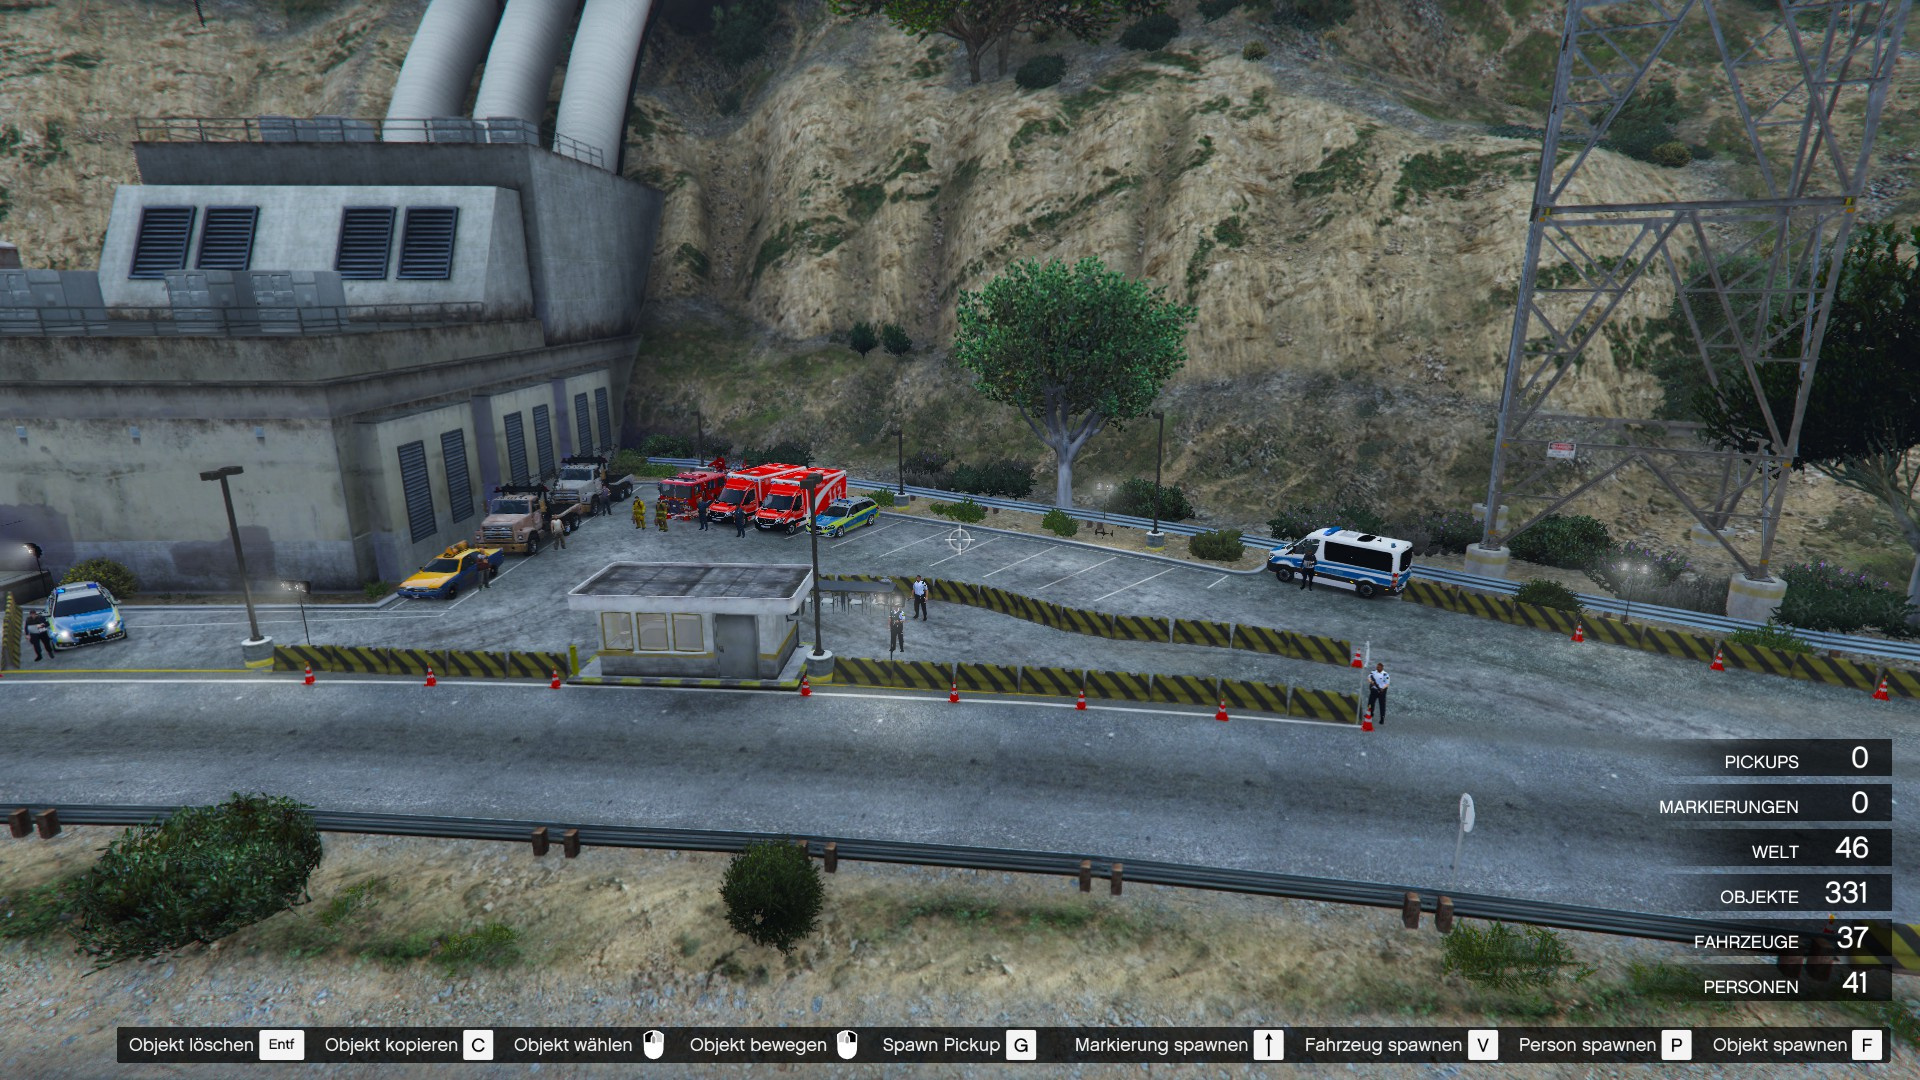 Checkpoint Highway Gta5